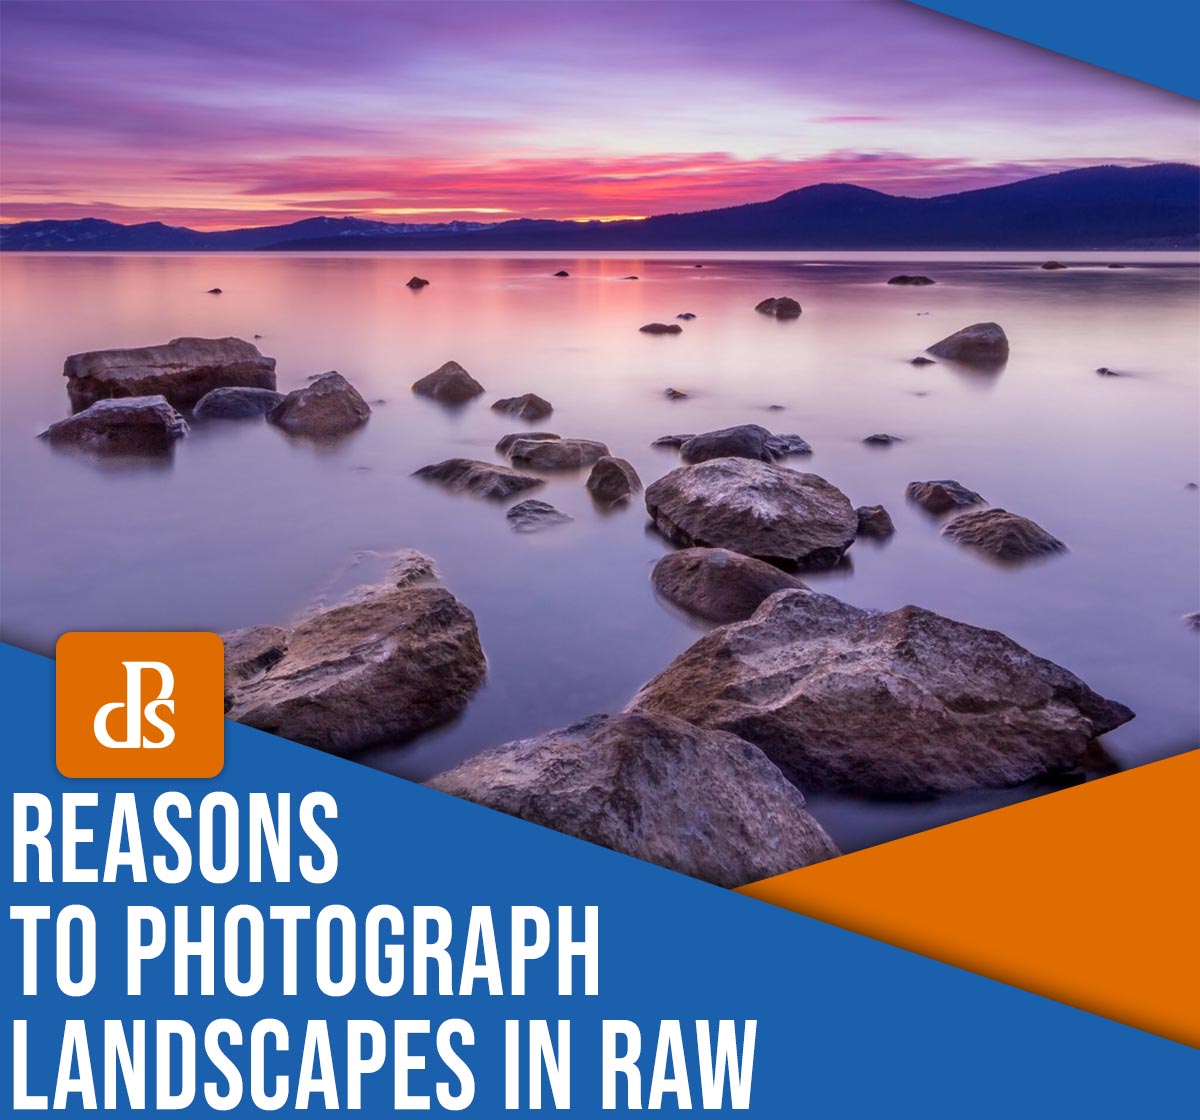 Reasons to photograph landscapes in RAW